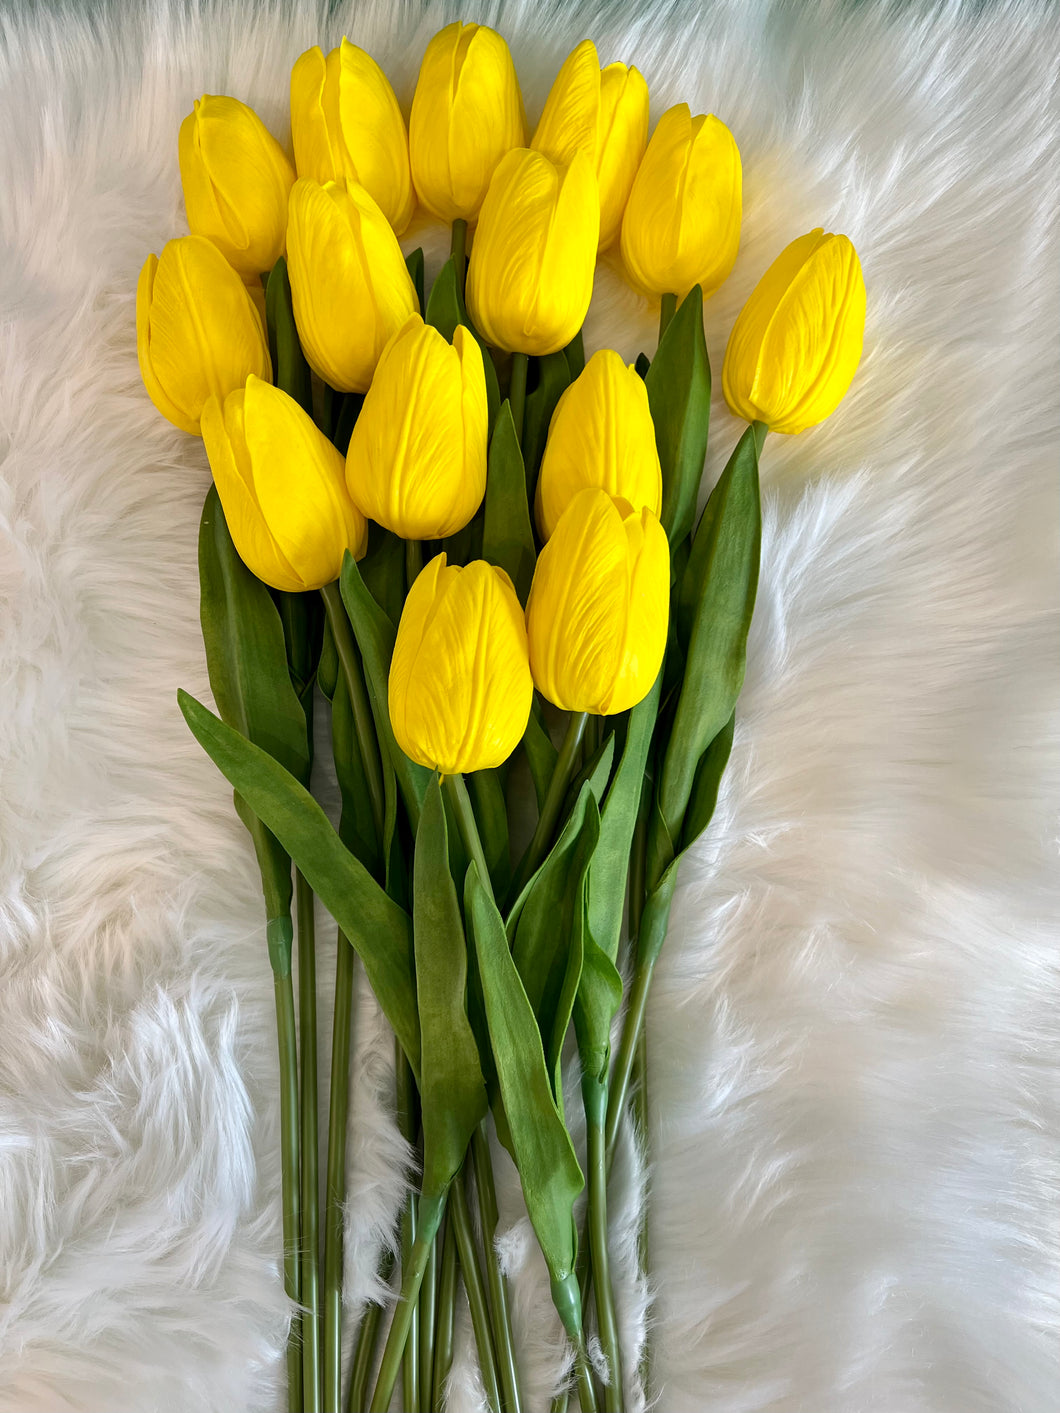 Tulip Flower Artificial Real Touch With Stem Made From Premium PU Leather in Yellow Color